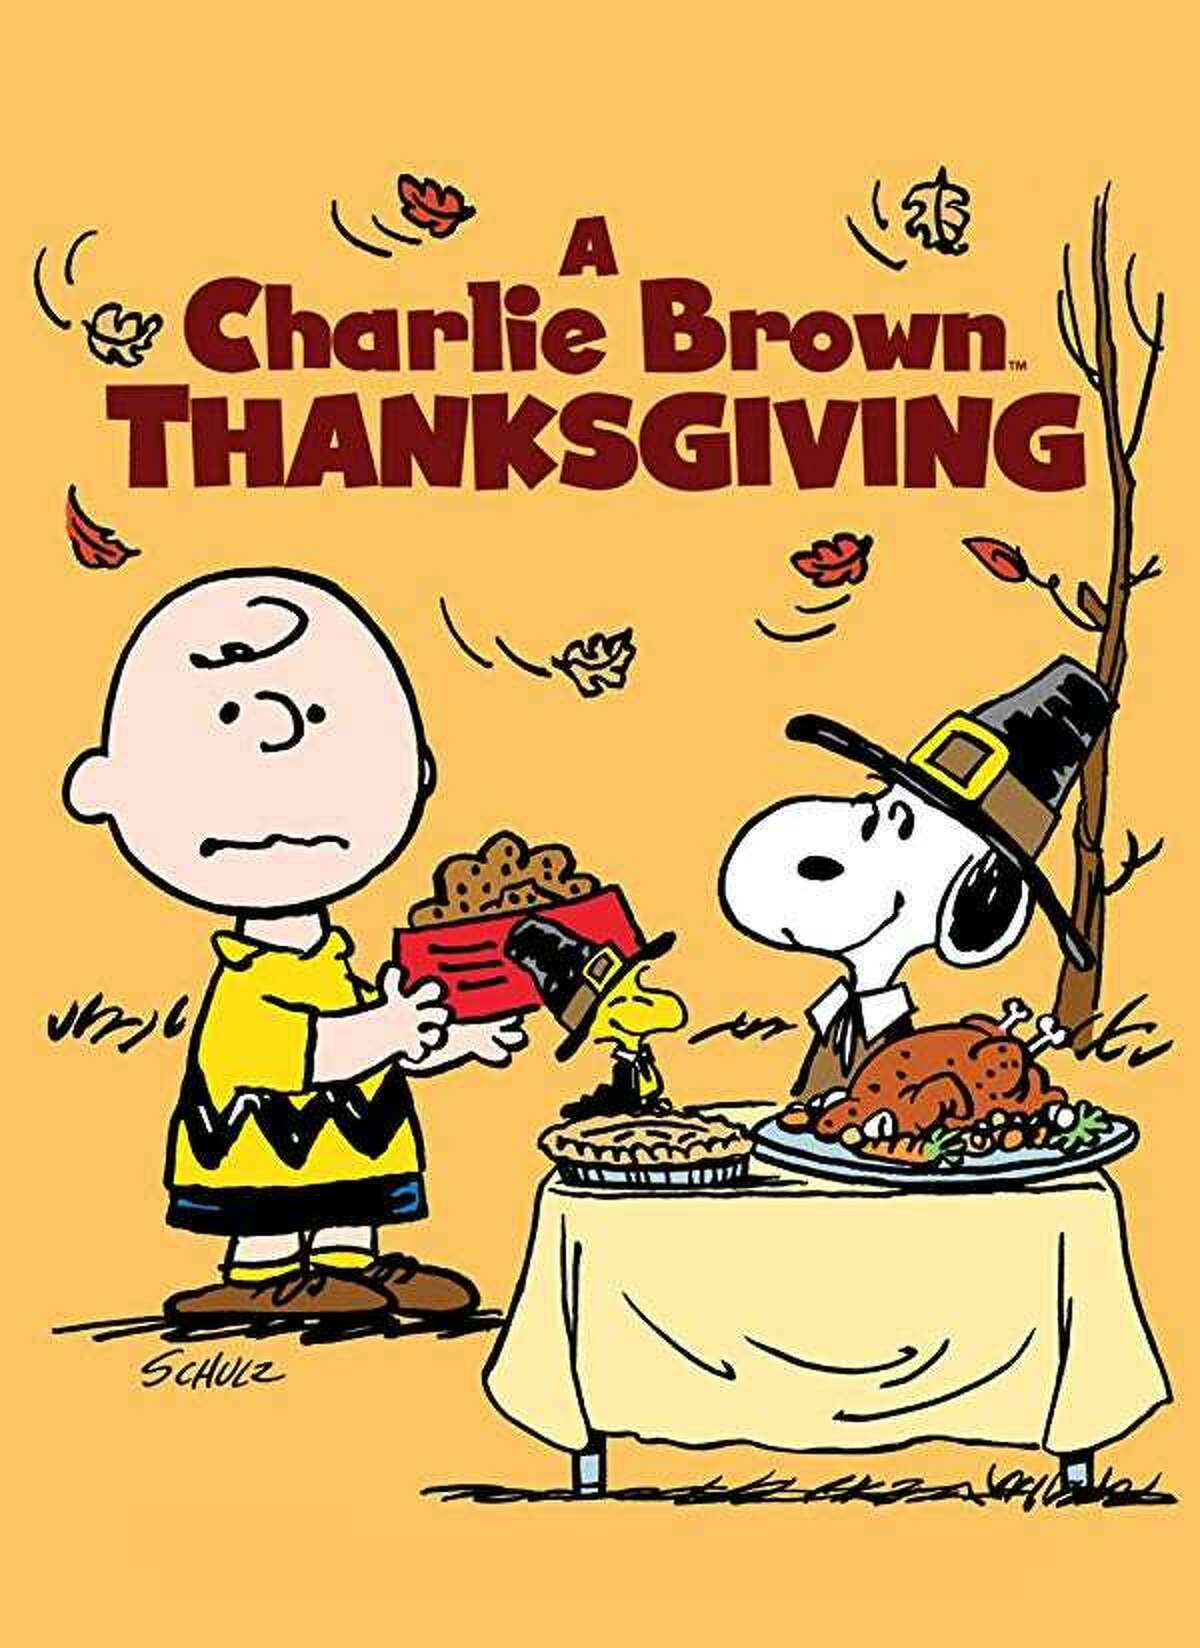 'A Charlie Brown Thanksgiving' will air just before Thanksgiving